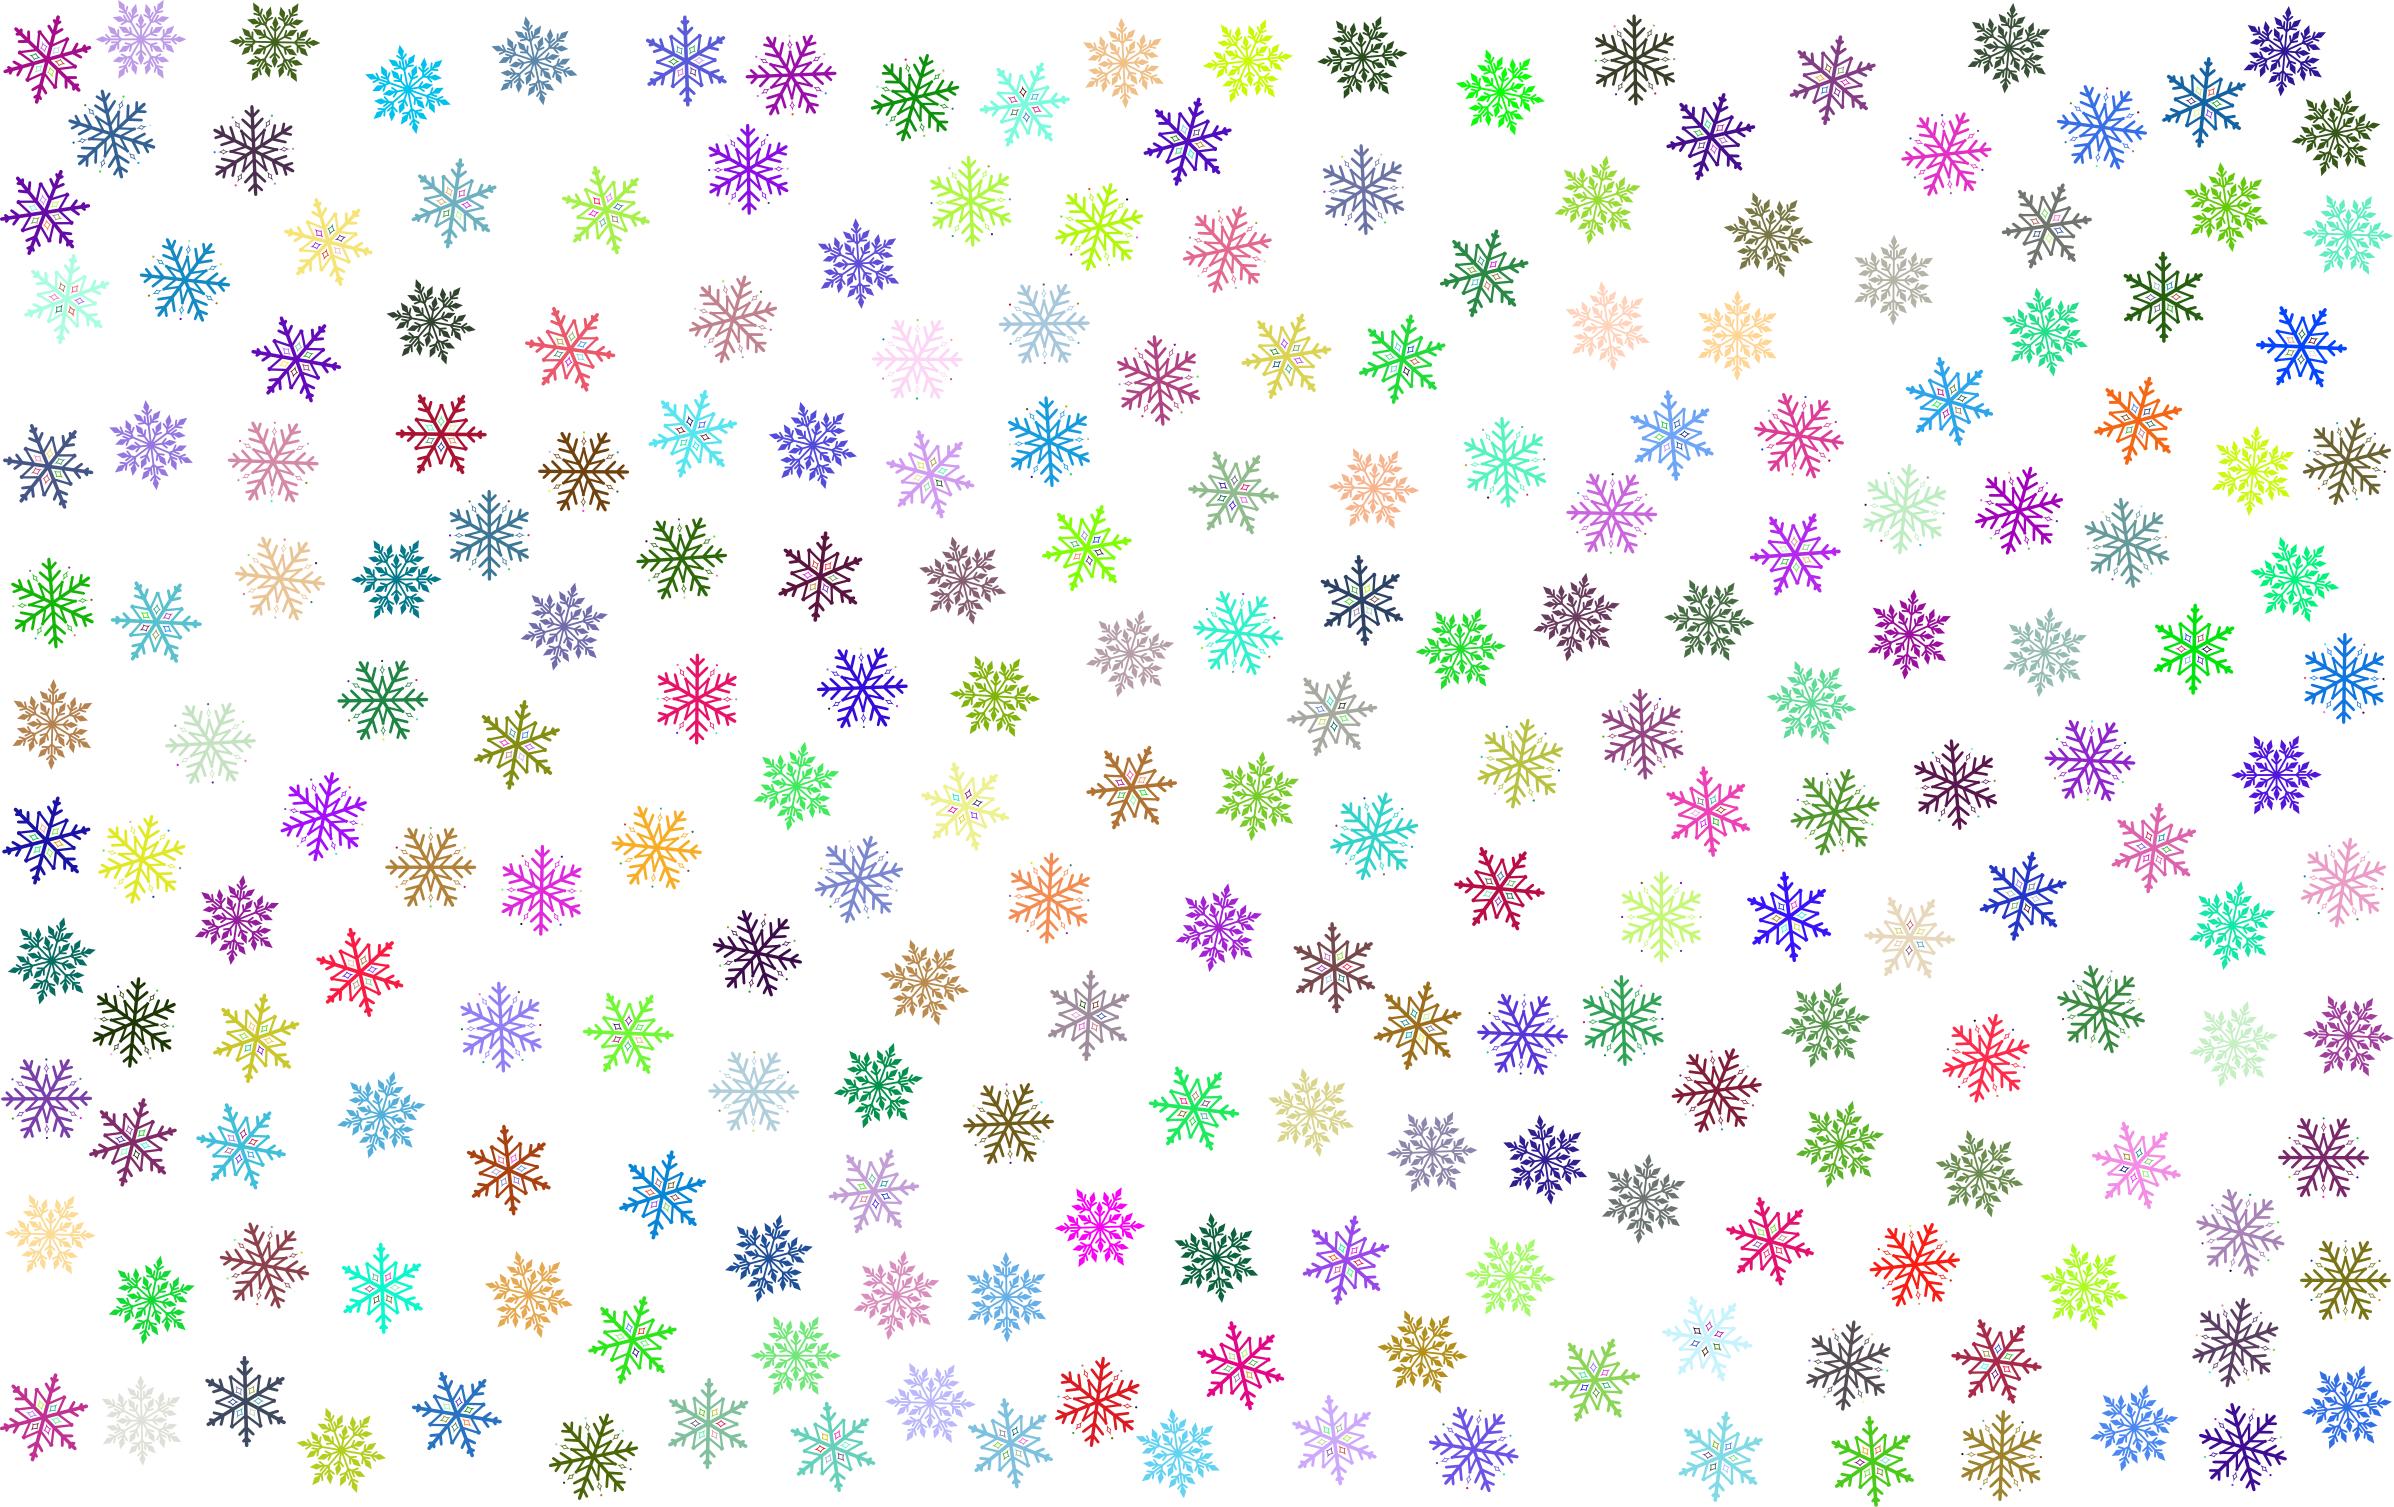 Prismatic Snowflakes Pattern icons